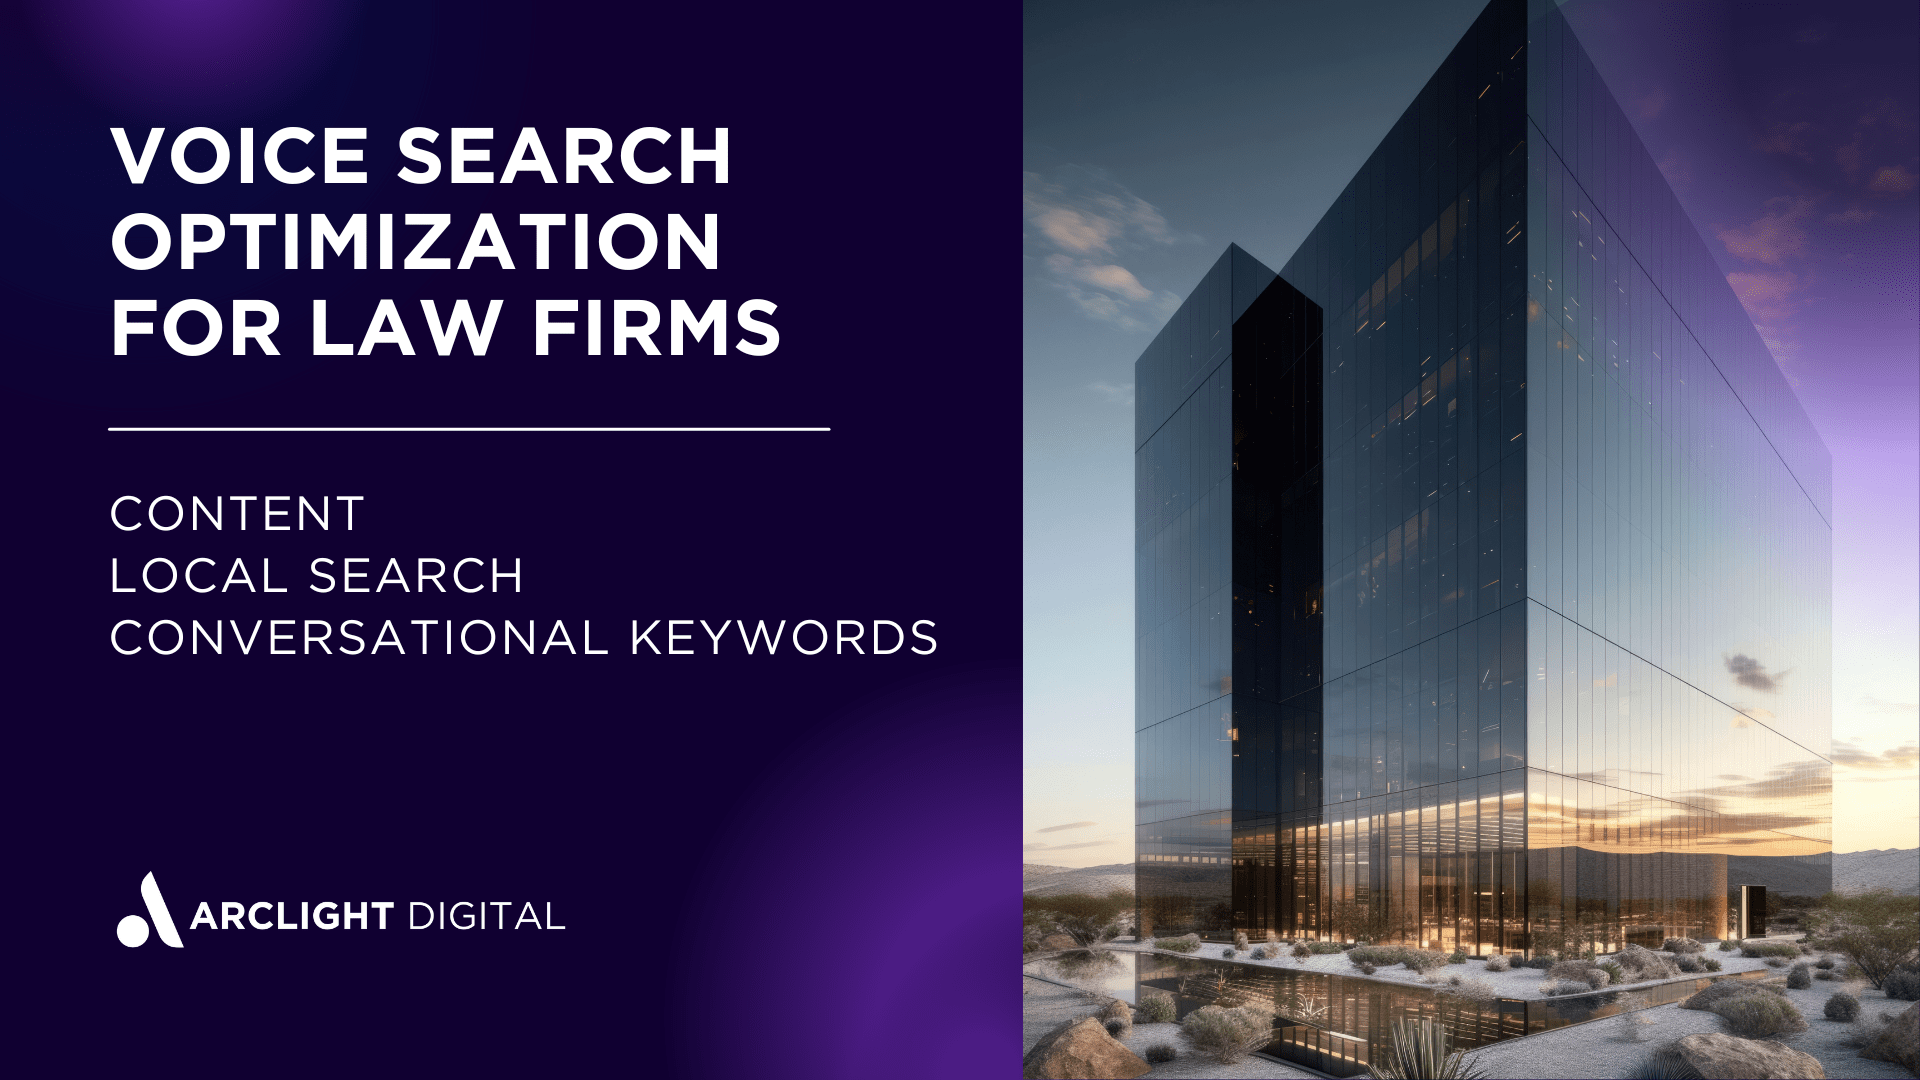 A futuristing corporate law firm high-rise with the title "Voice Search Engine Optimization for Law Firms" in white on a purple background.